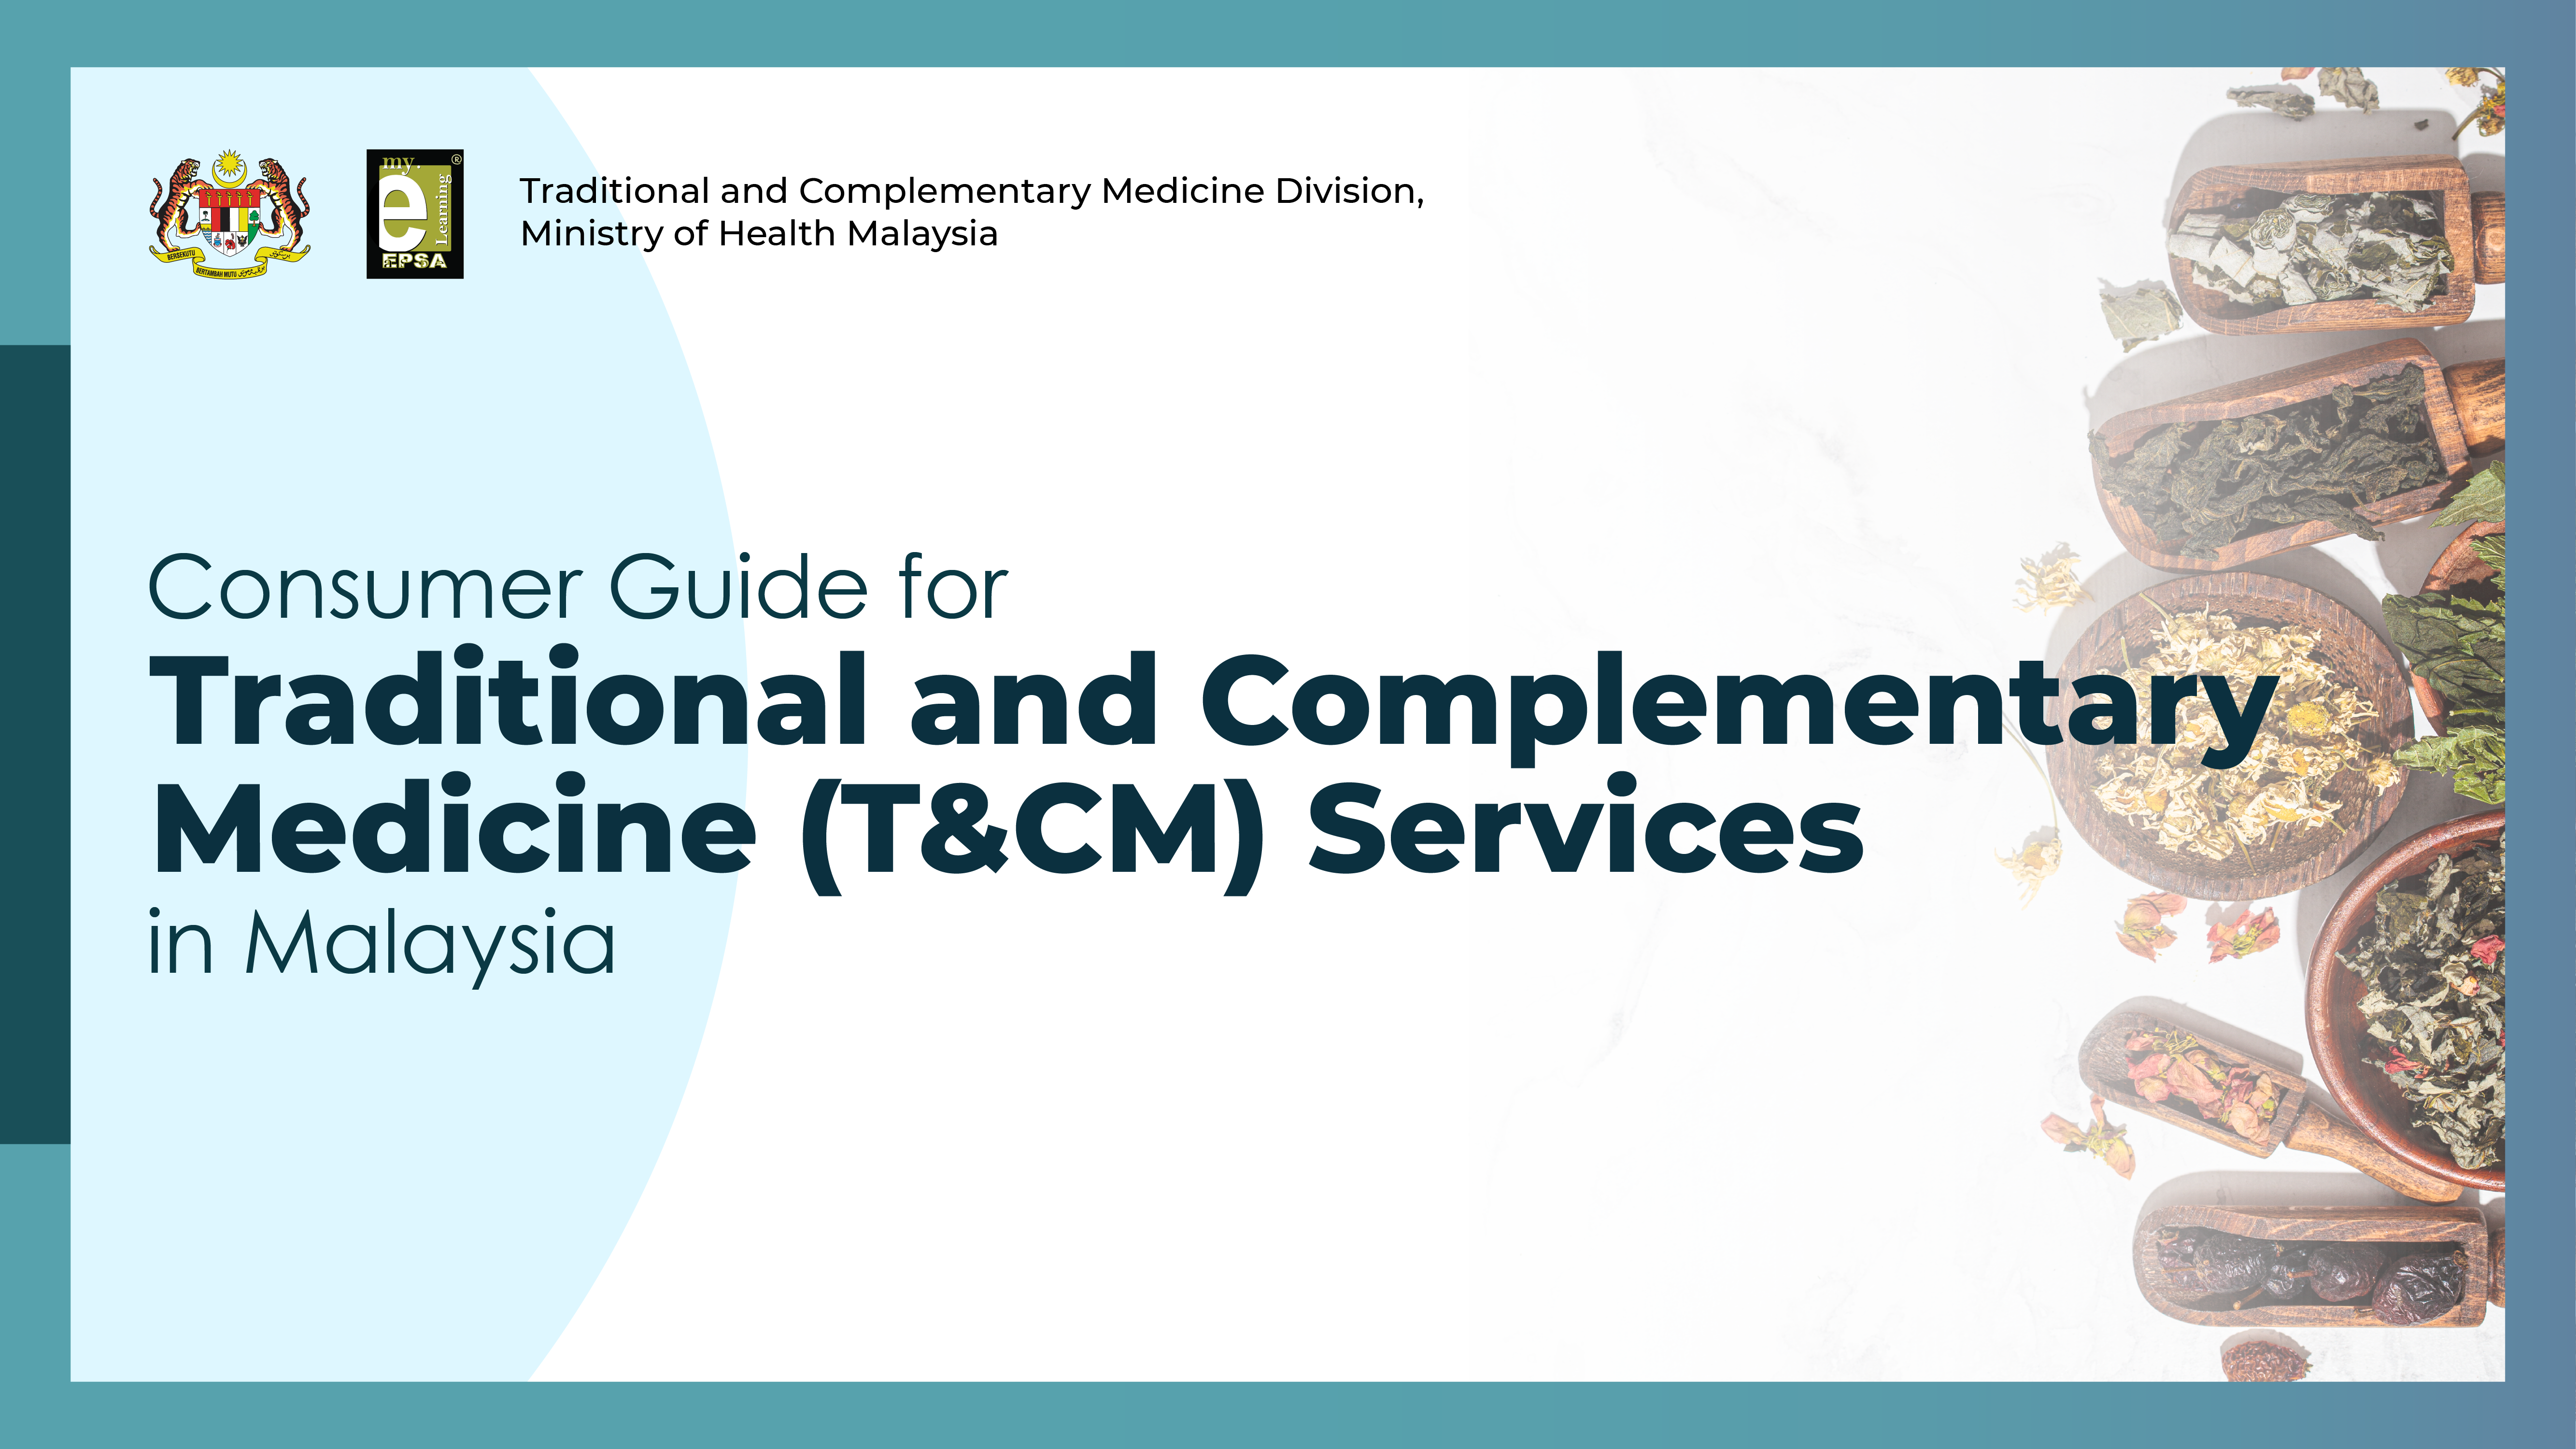 Consumer Guide For Traditional And Complementary Medicine (T&CM) Services In Malaysia